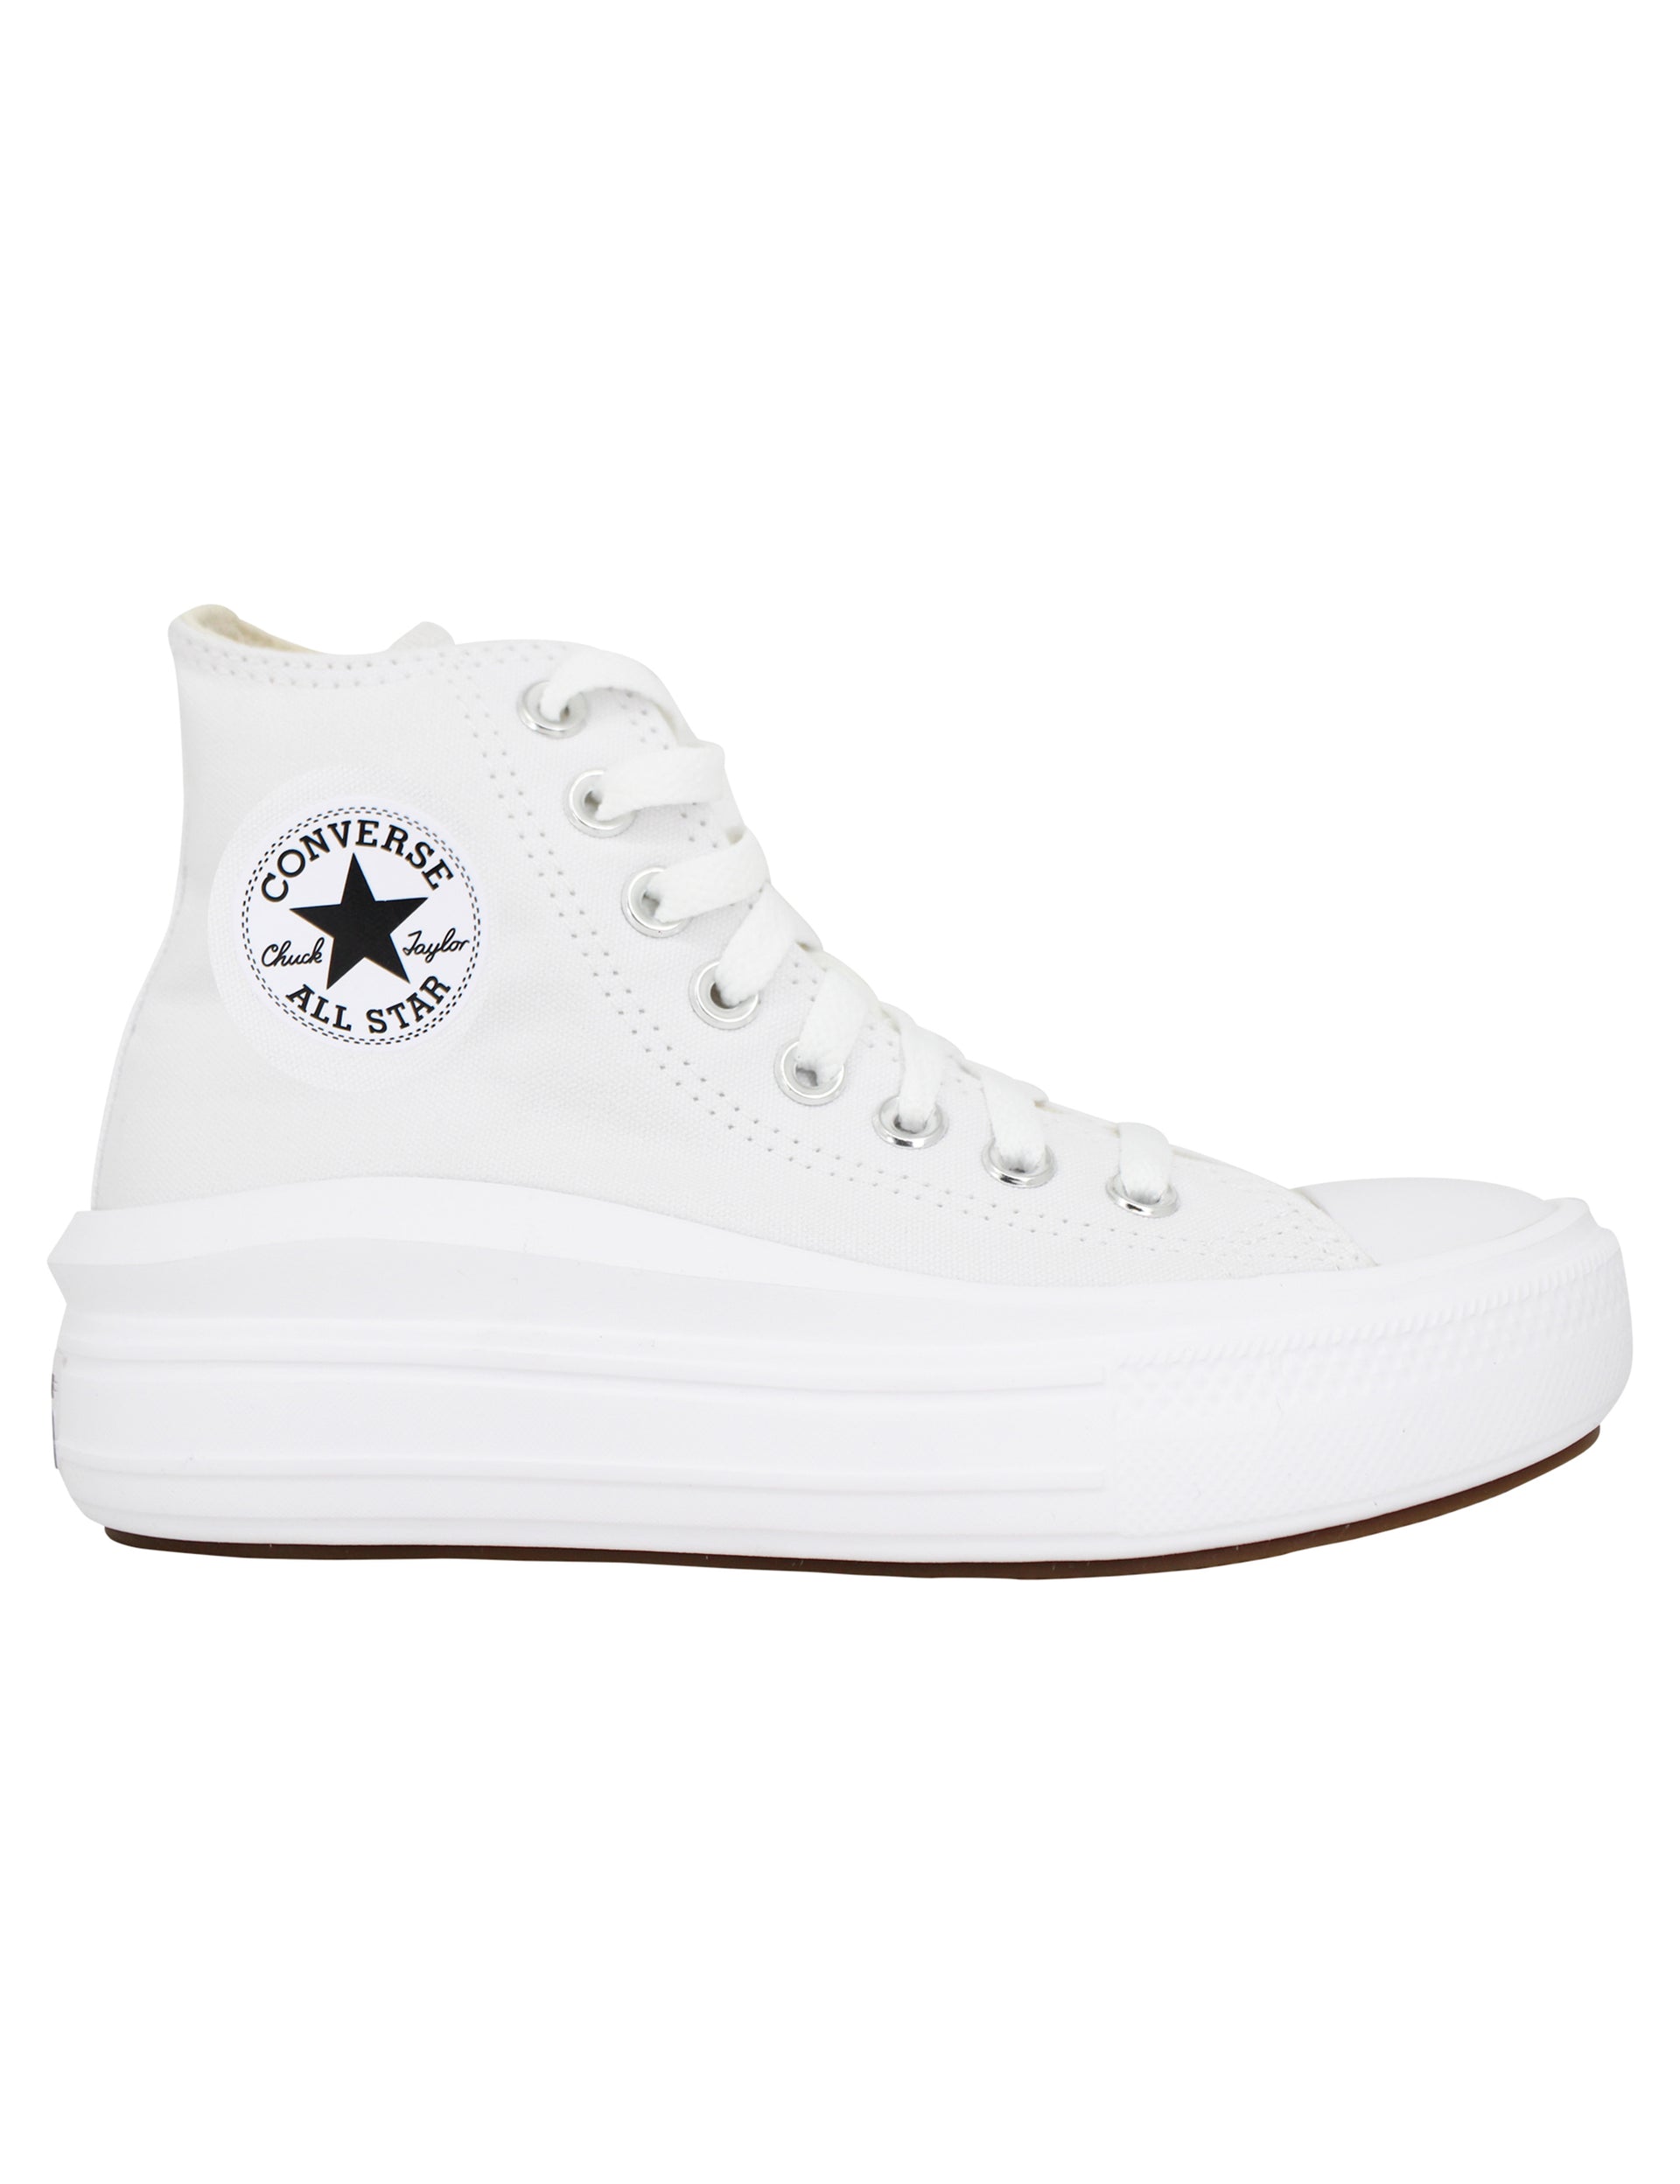 Chuck Taylor women's sneakers, white canvas ankle boot with high bottom